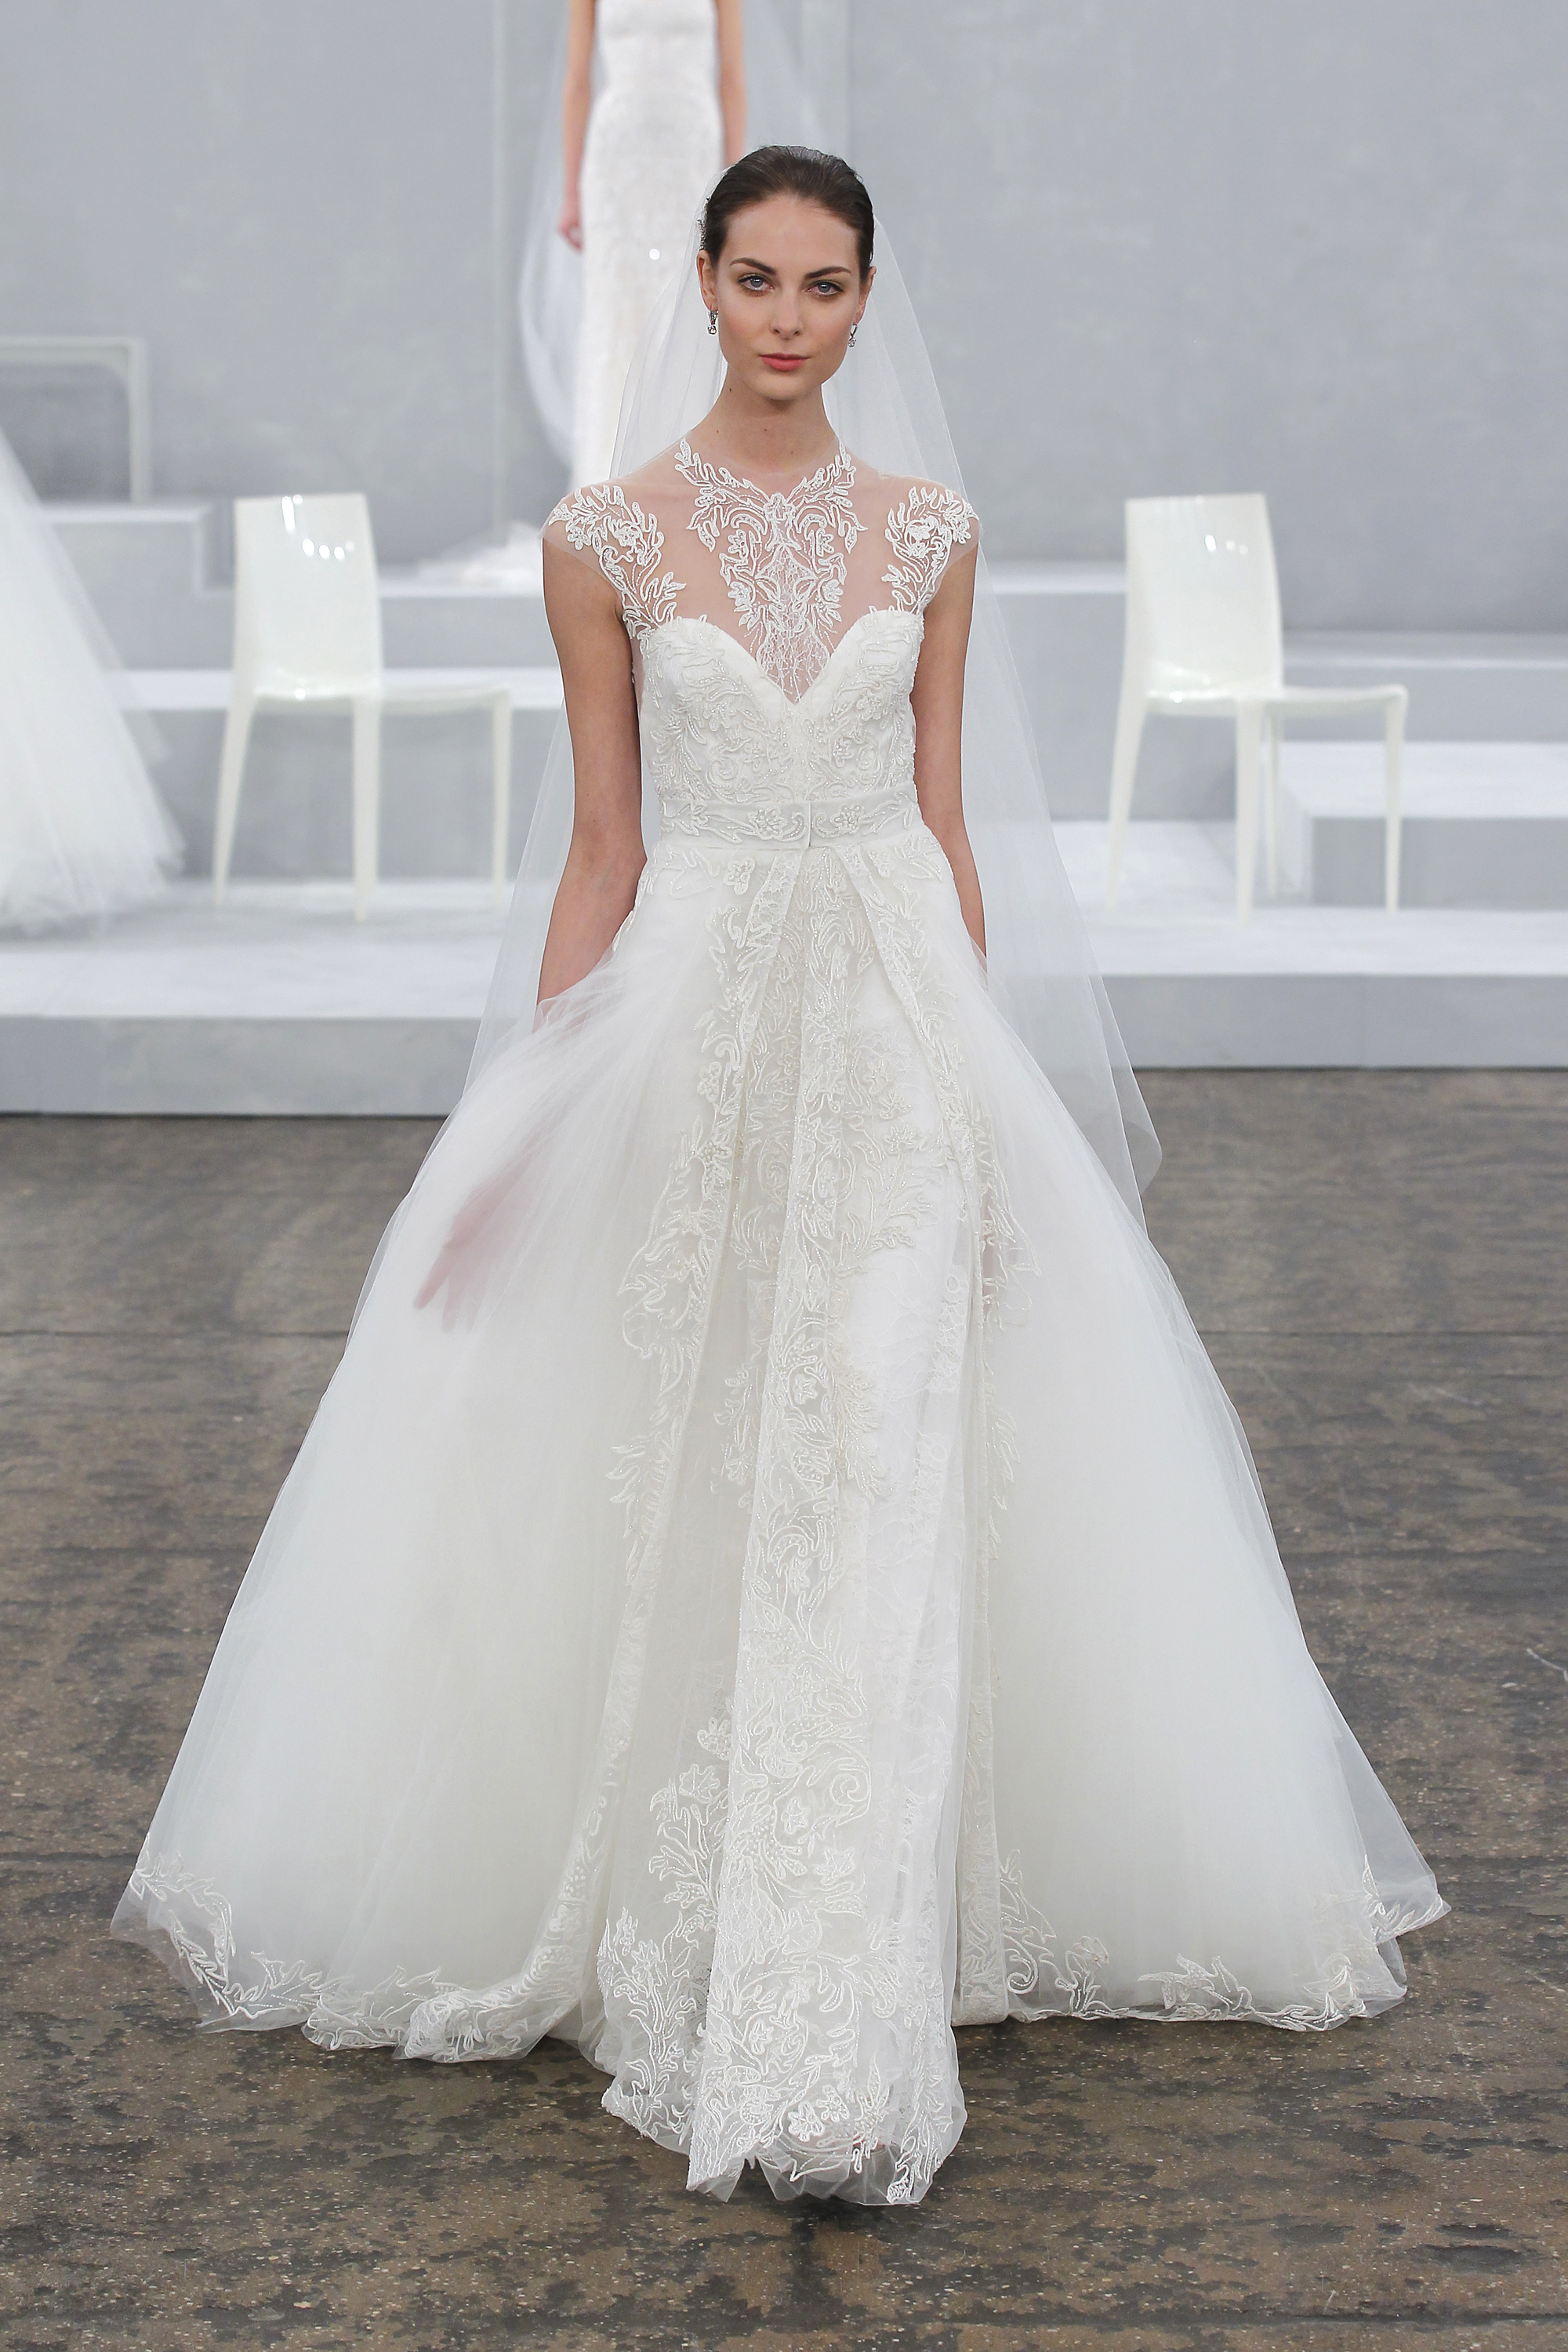 Wedding Dress with a Dramatic Neckline from Monique Lhuillier Spring 2015 Bridal Collection